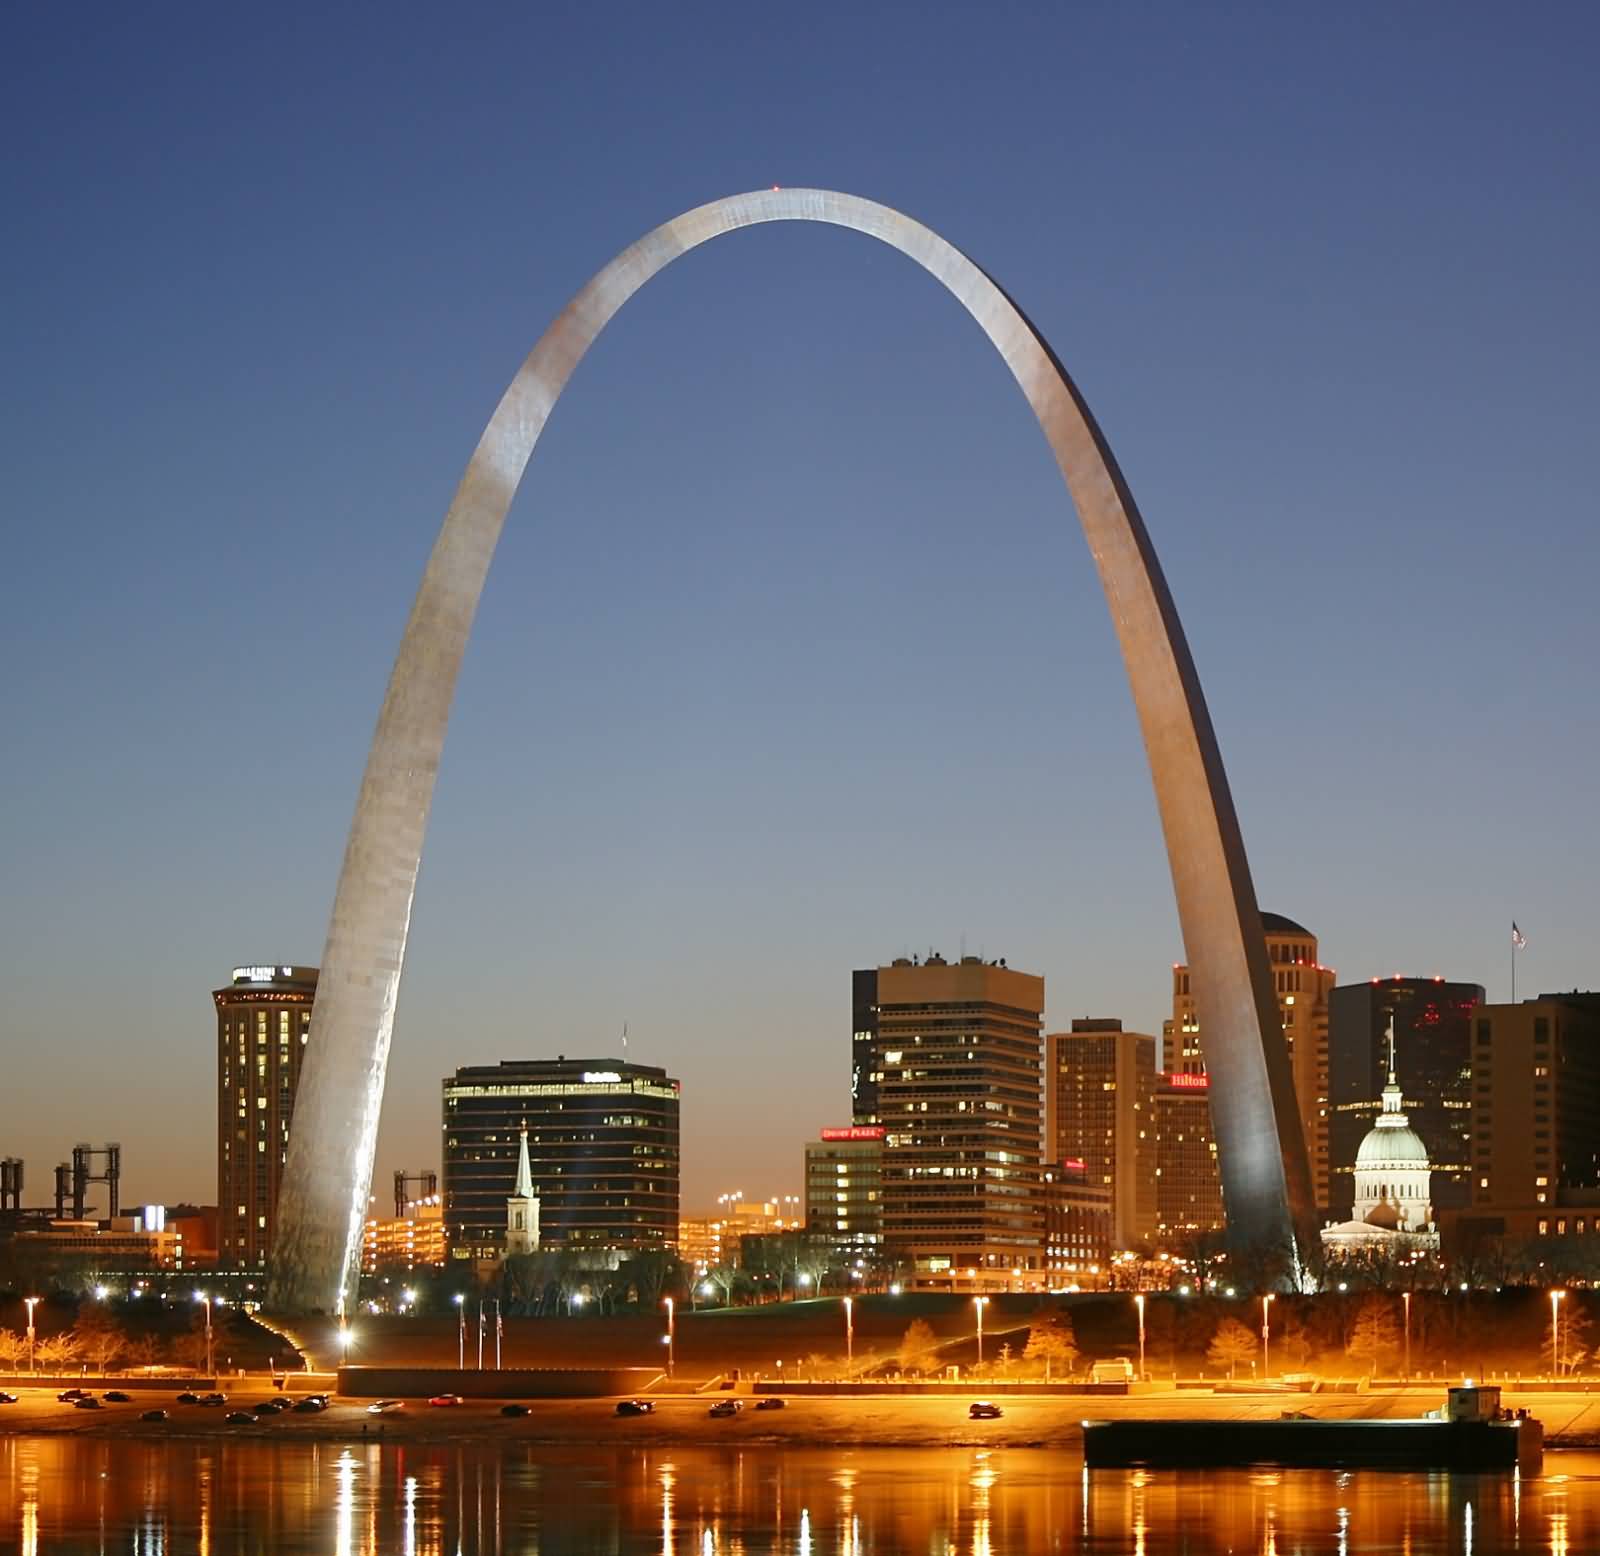 Gateway Arch In St. Louis At Night